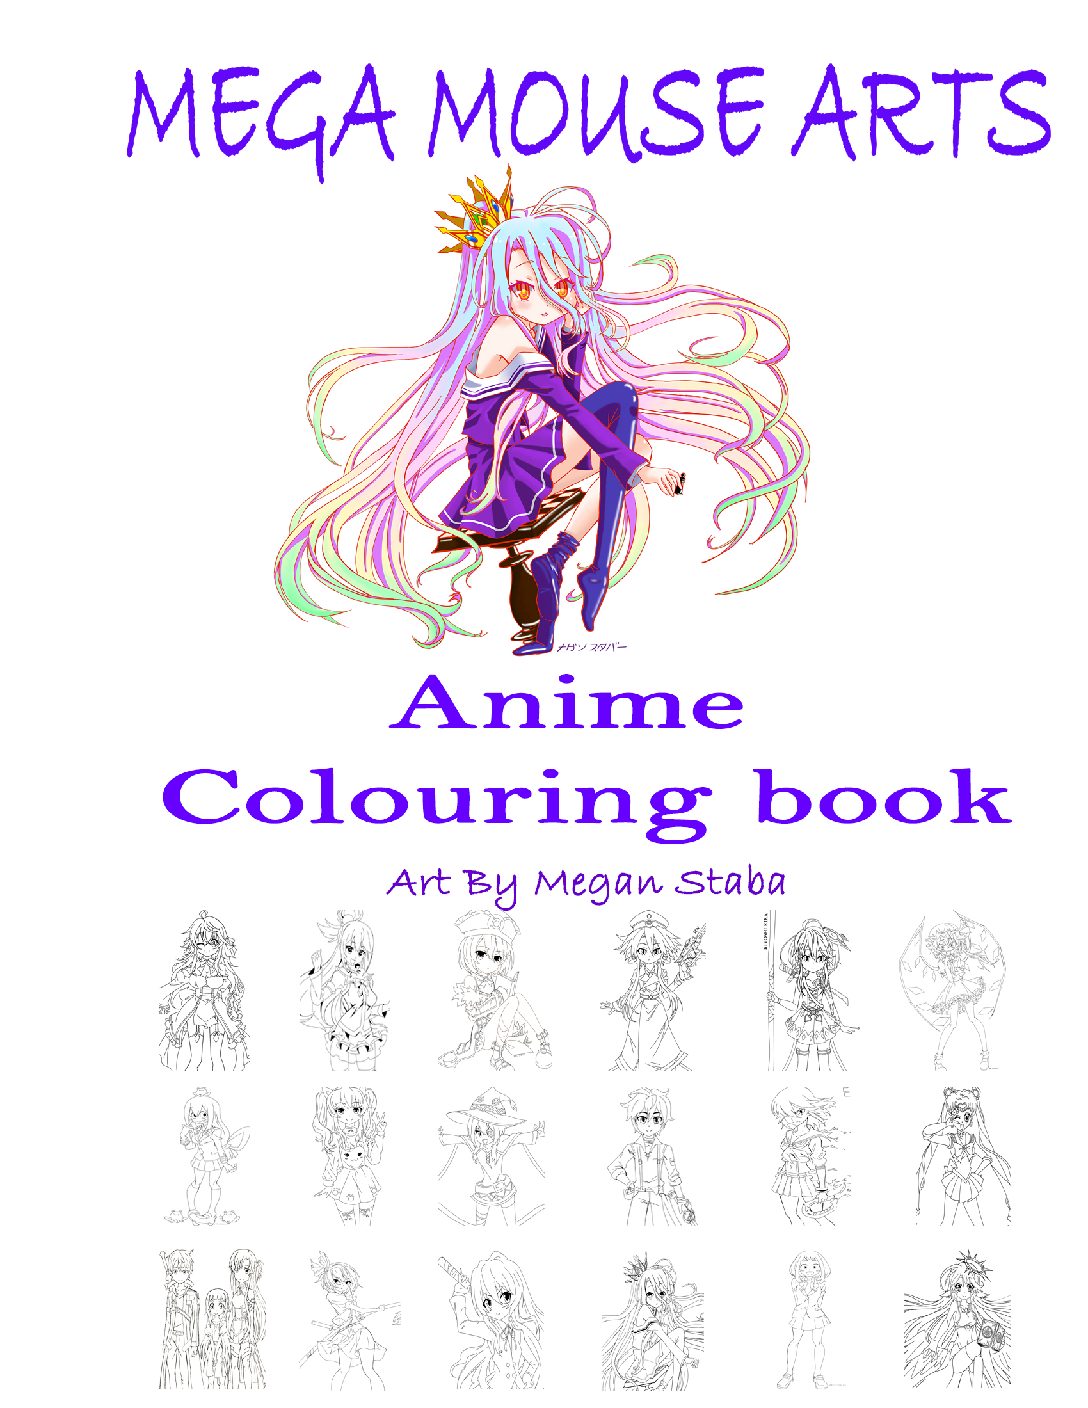 Colouring Book – Anime – Welcome to MegaMouseArts!